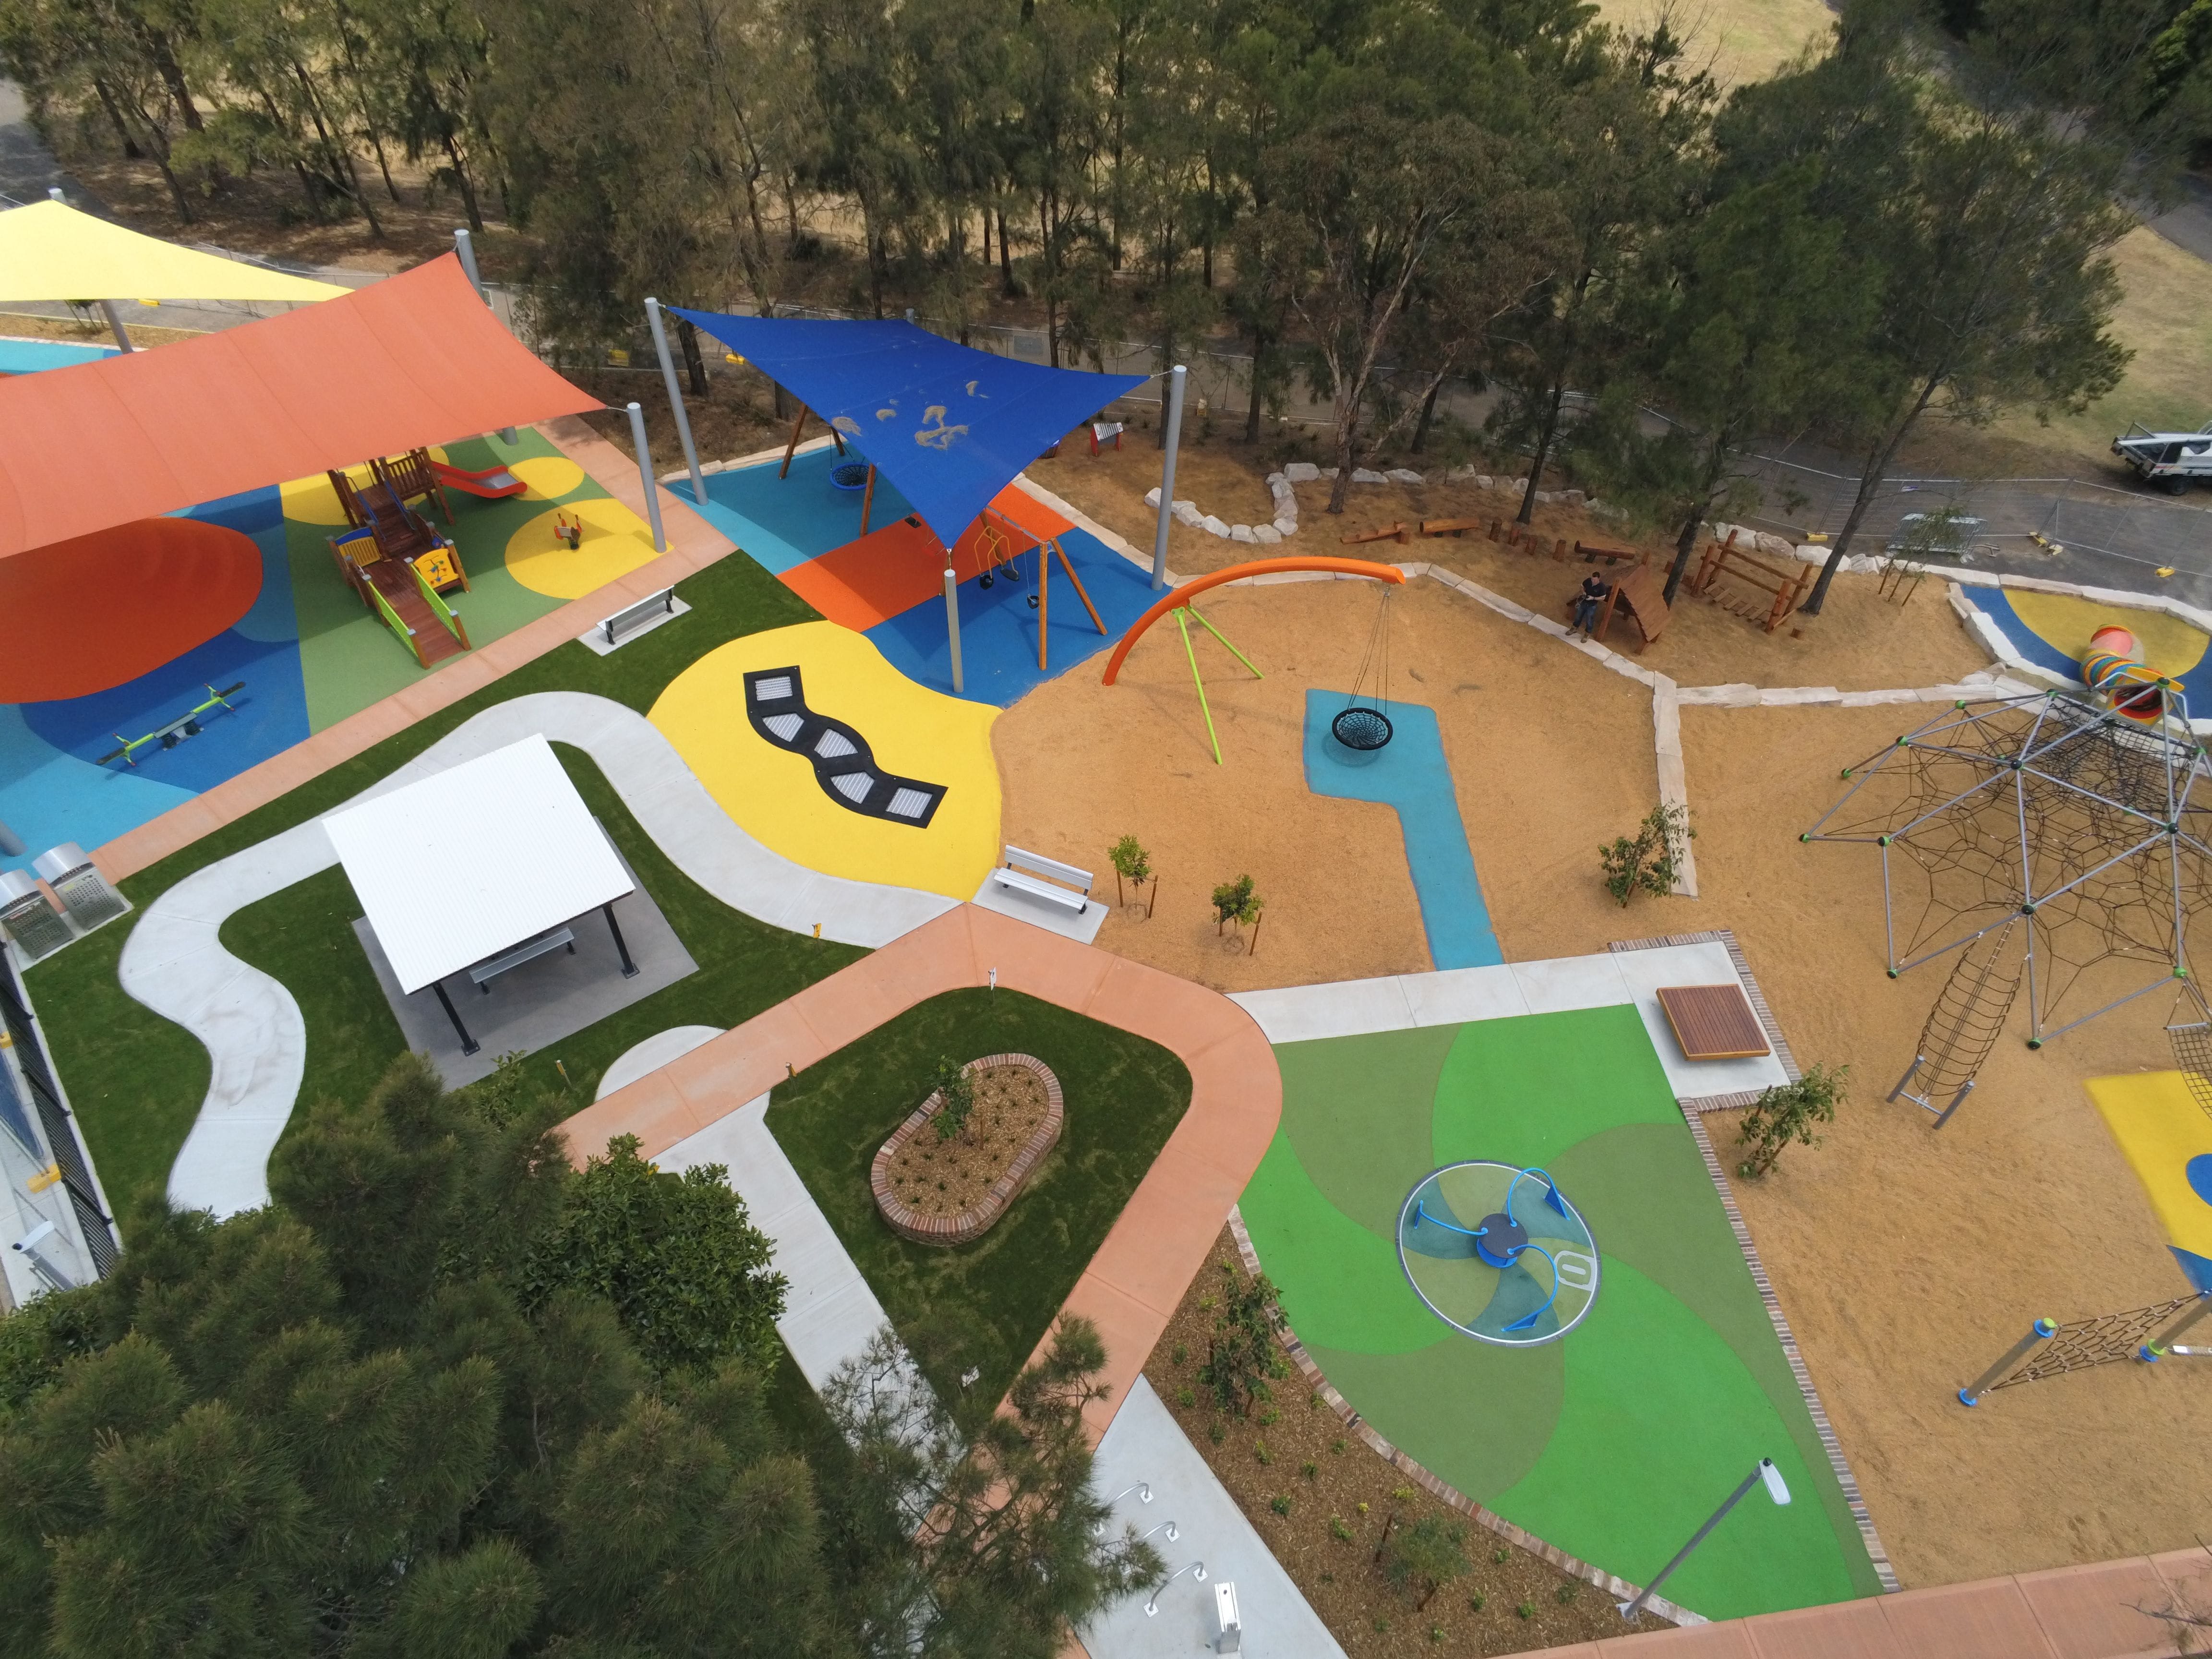 Australian Sports & Safety Surfaces - Inclusive Adventure Playground and Bike Training Circuit at Kempt Field Image -5df9792fa3e9c